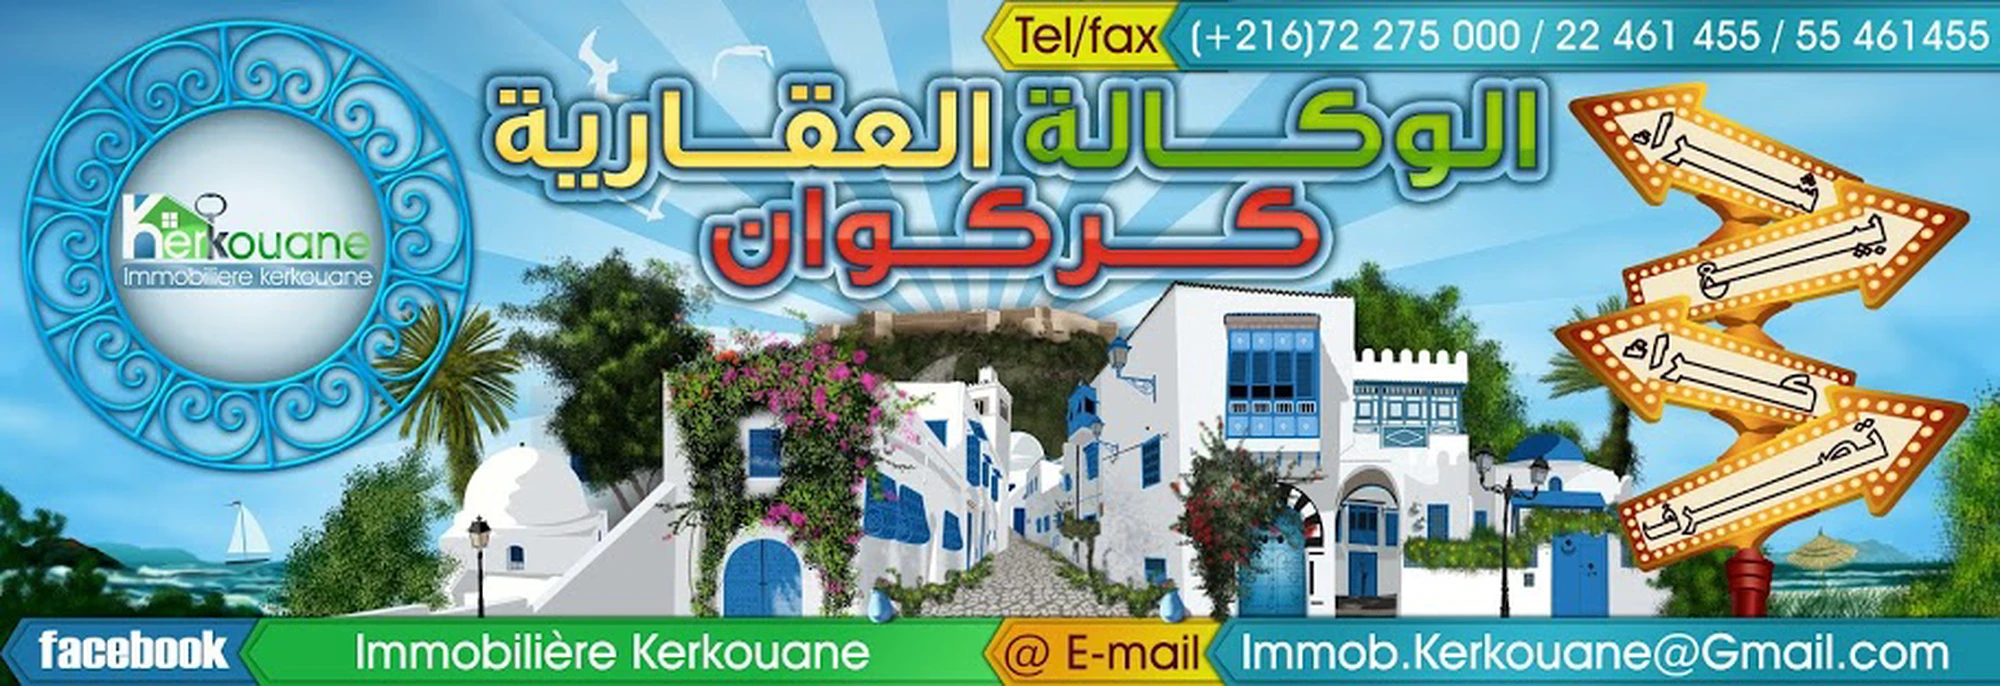 tayara shop cover of Immobiliere Kerkouane